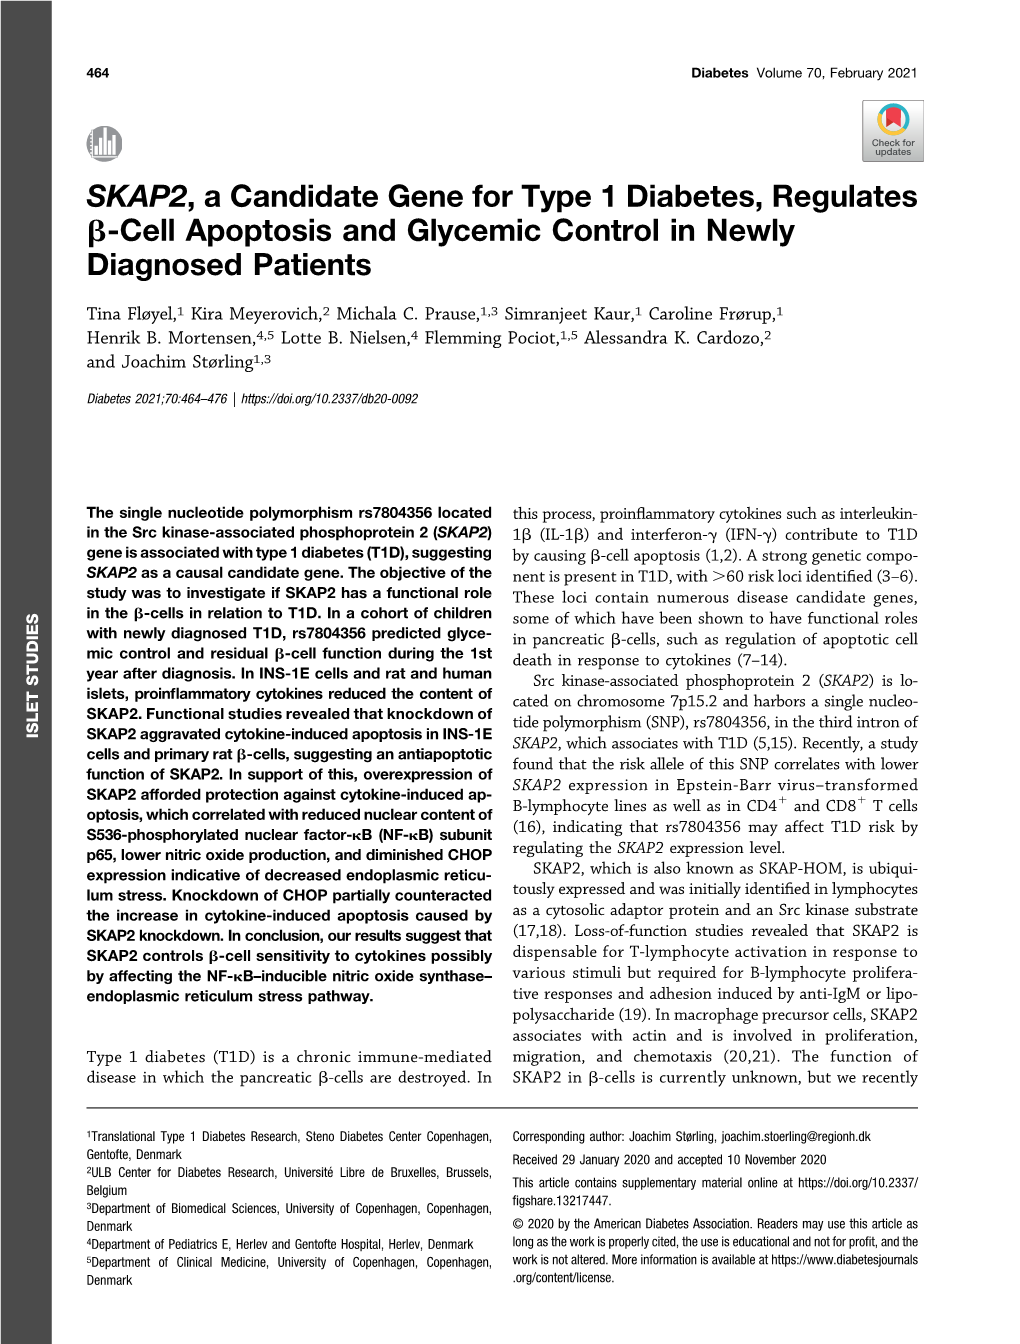 SKAP2, a Candidate Gene for Type 1 Diabetes, Regulates Β-Cell